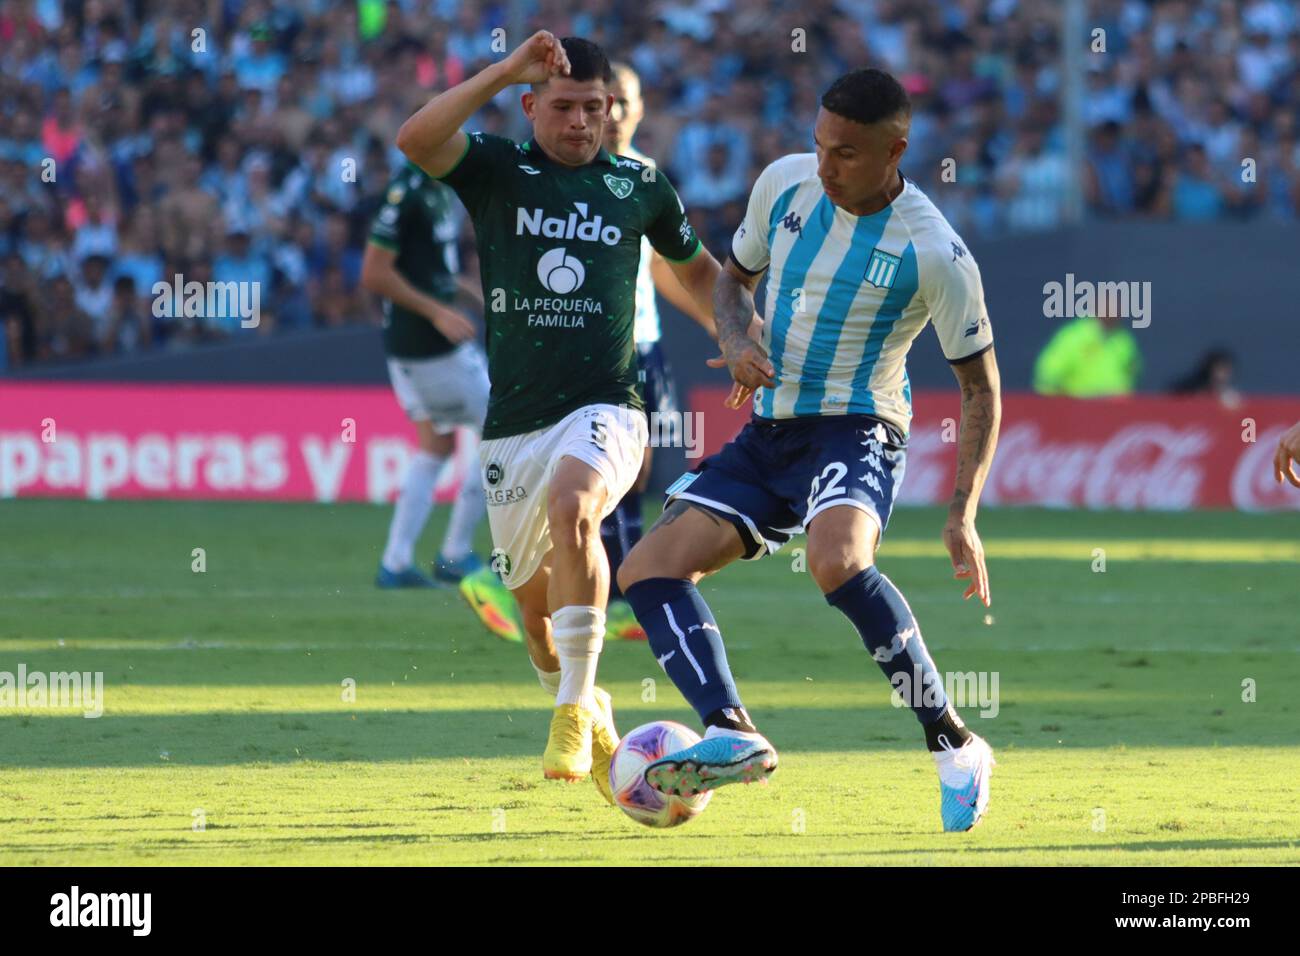 Avellaneda, Argentina, 12, March, 2023. Racing Club Fans during the Match  between Racing Club Vs. Club Atletico Sarmiento Editorial Stock Photo -  Image of liga, racing: 271804368